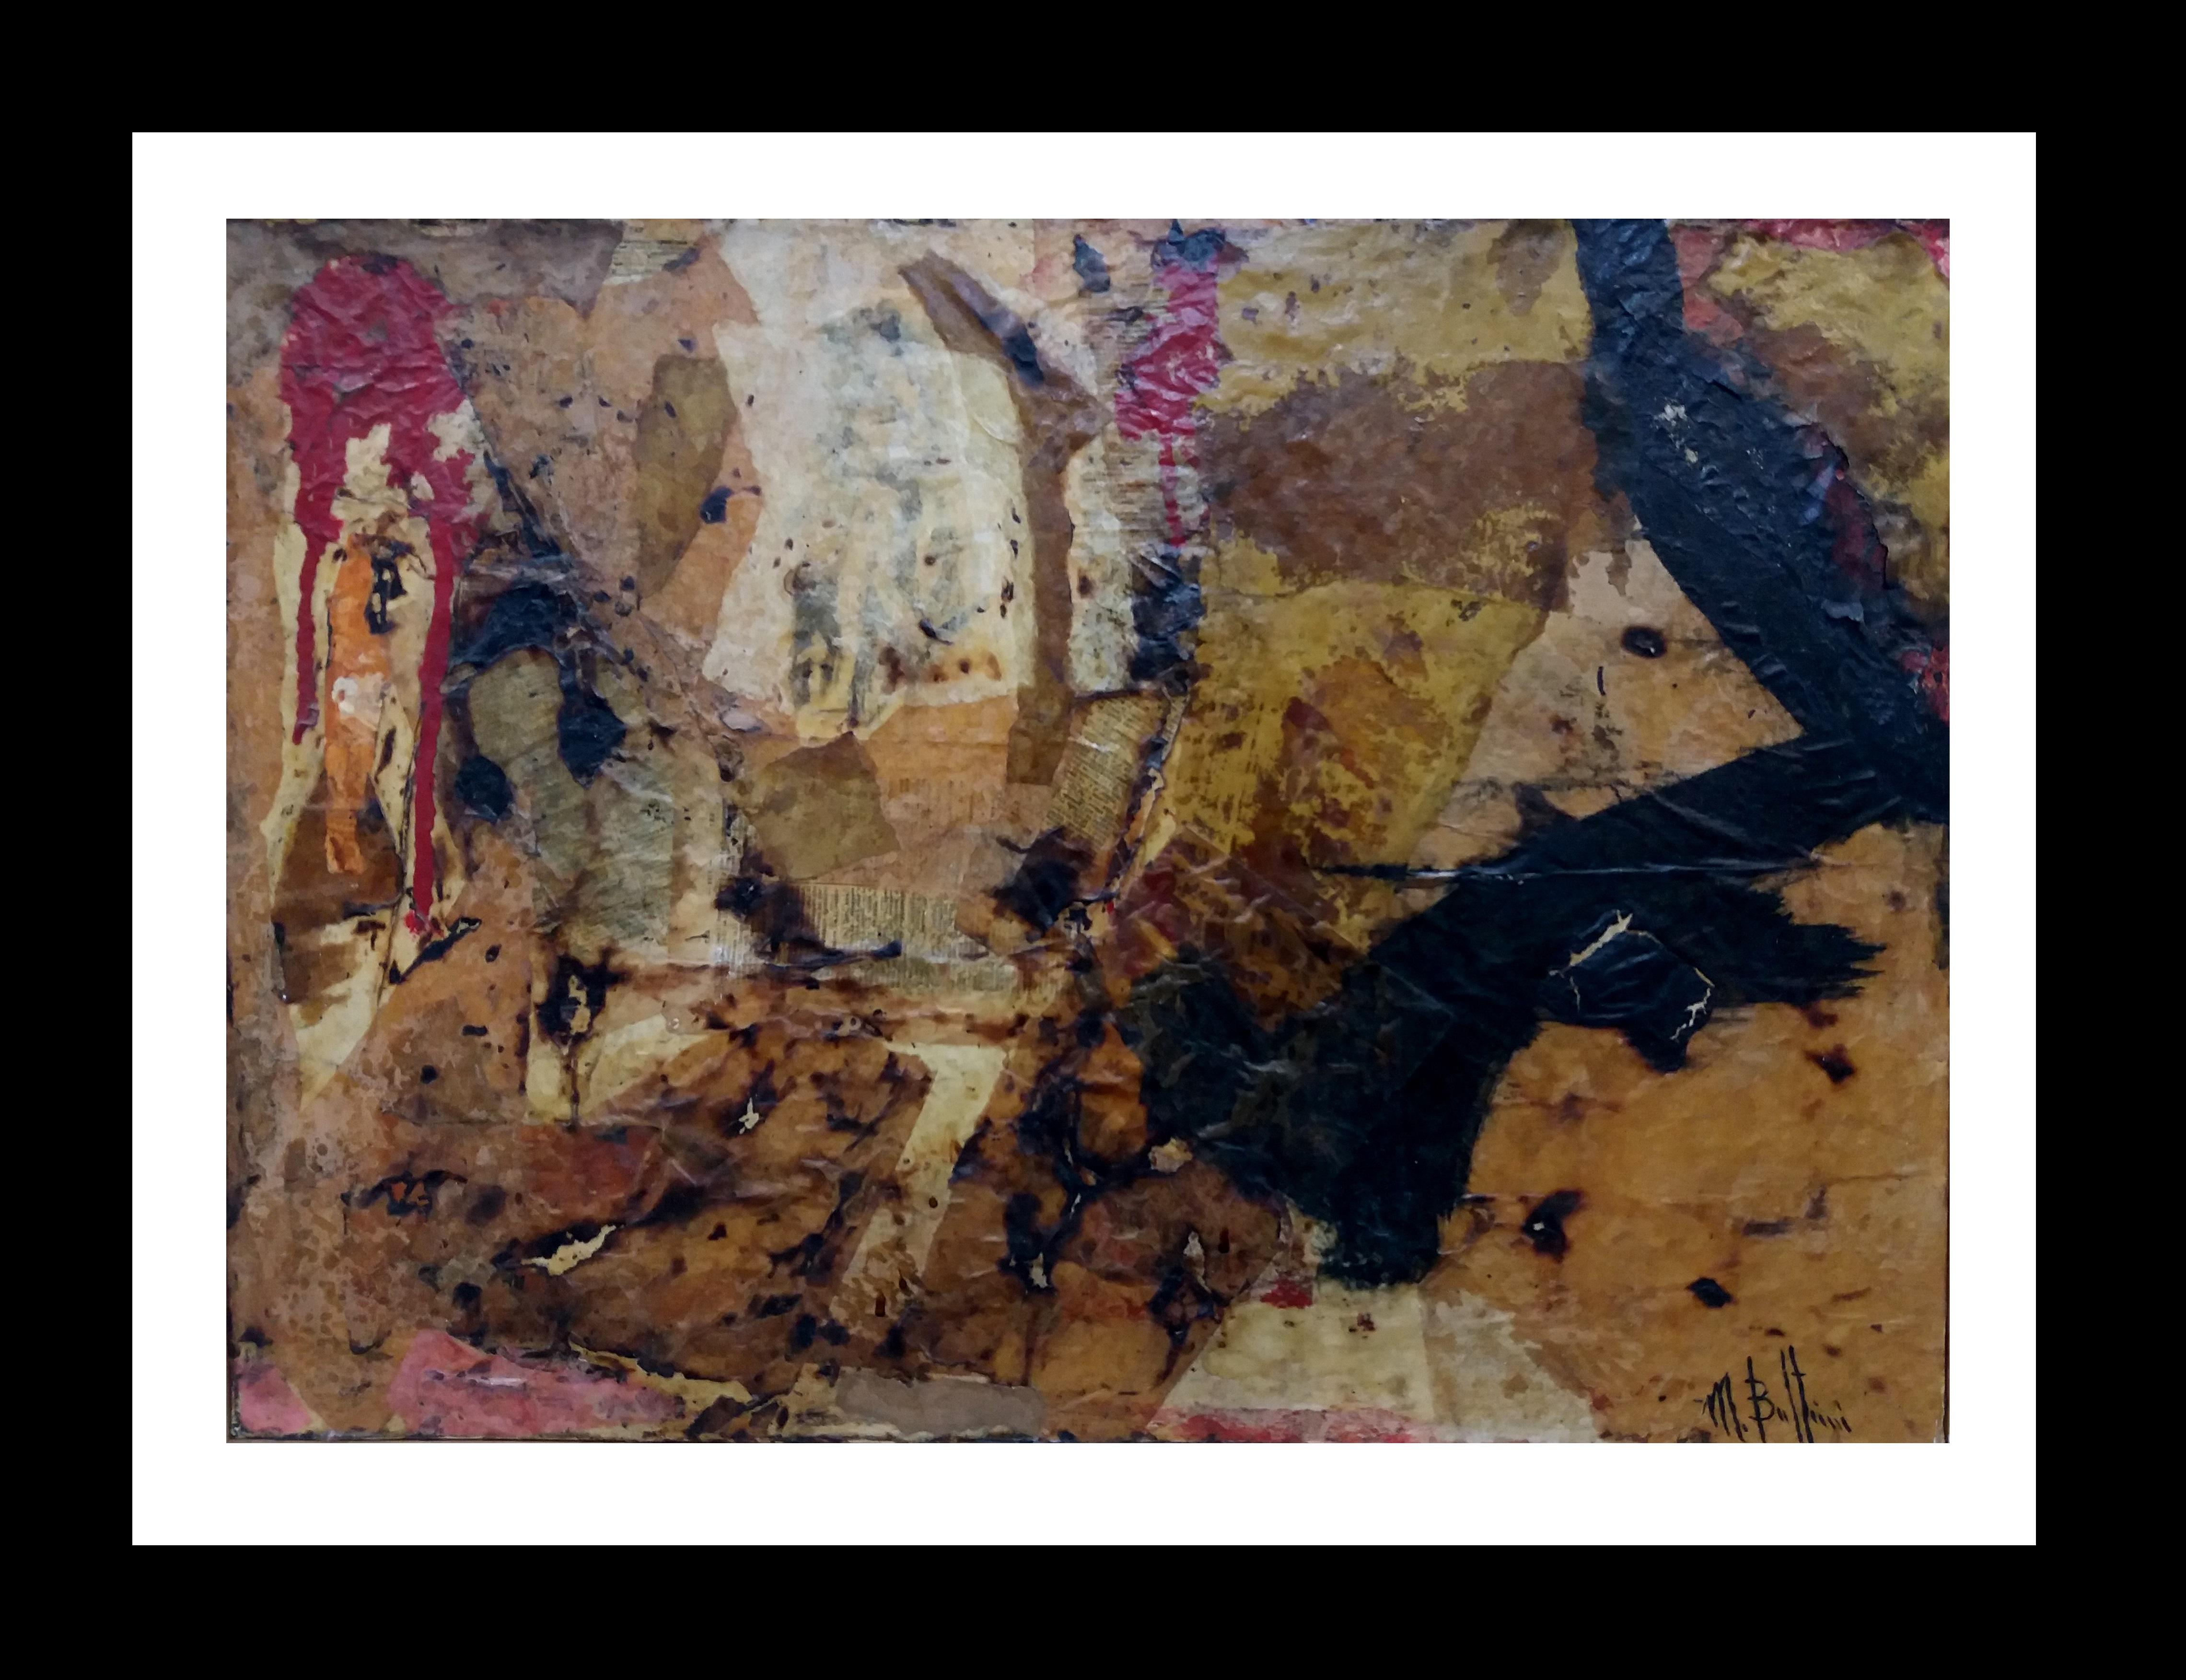 MATTEO BULTRINI Abstract Painting -  Bultrini. "GOLDEN AND BLACK" 2005 original contemporary mixed media painting